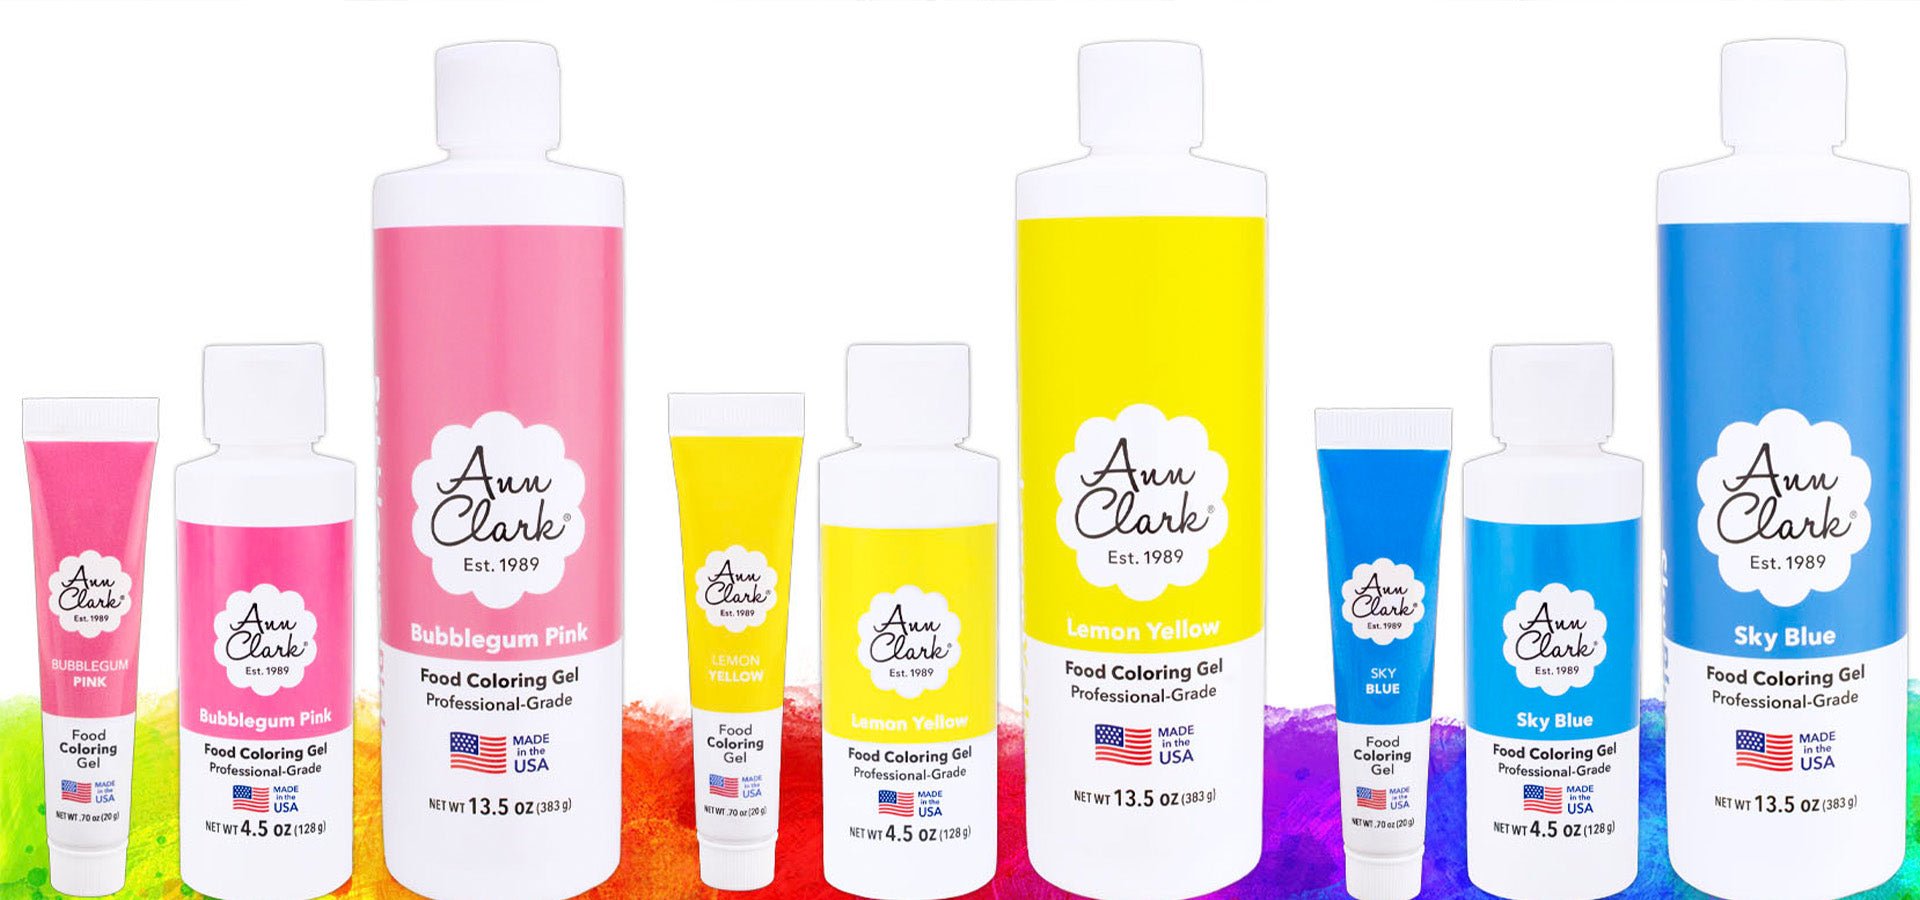 Pink, yellow, and blue Ann Clark food coloring in three sizes